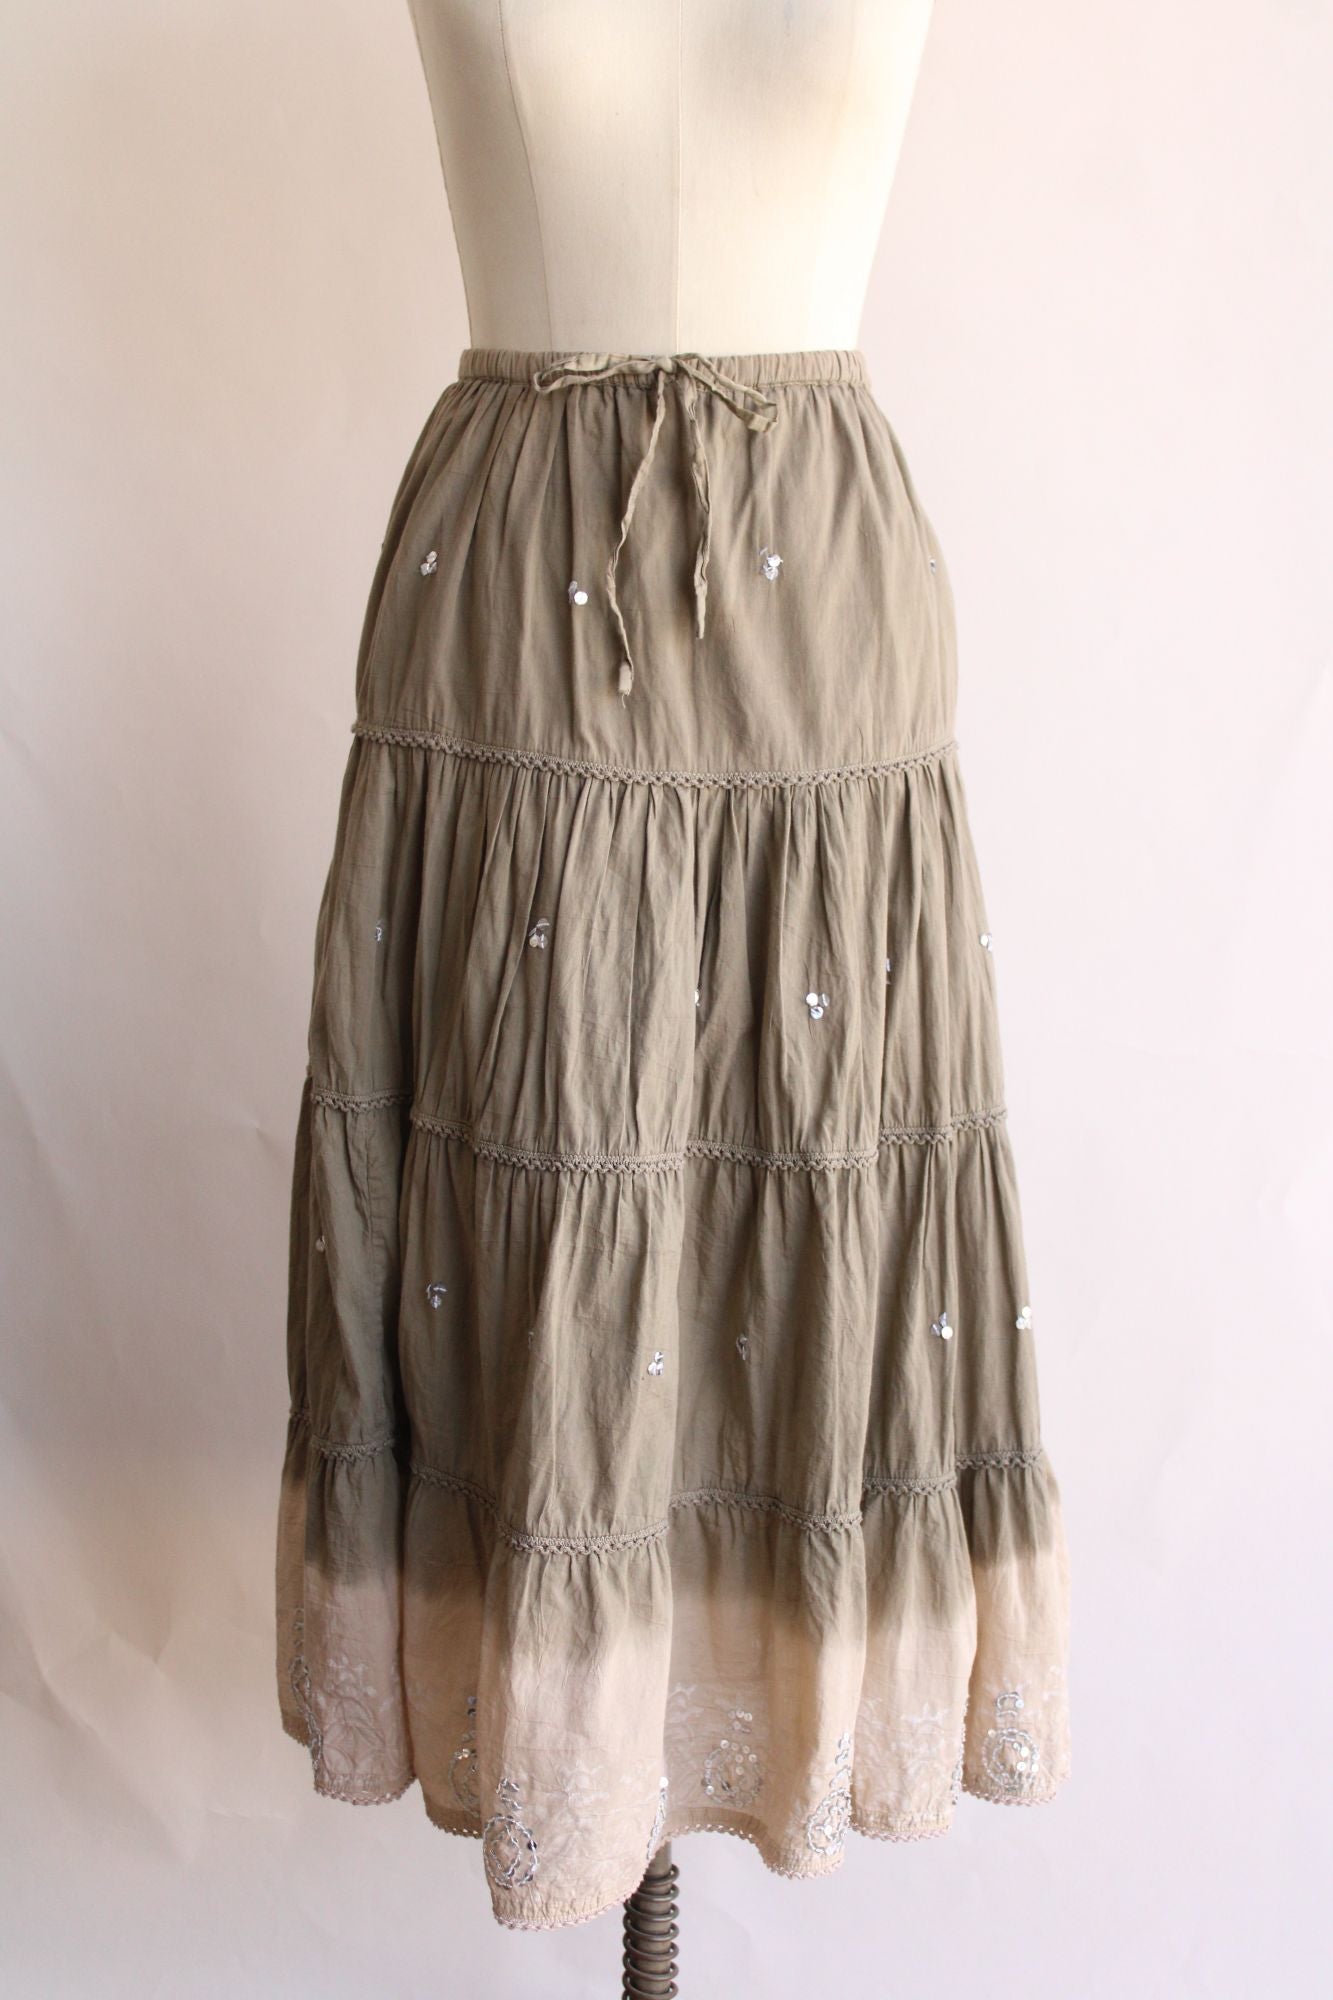 Angie Womens Peasant Skirt, Size Medium Khaki and Beige Multi Tiers Cottage Core